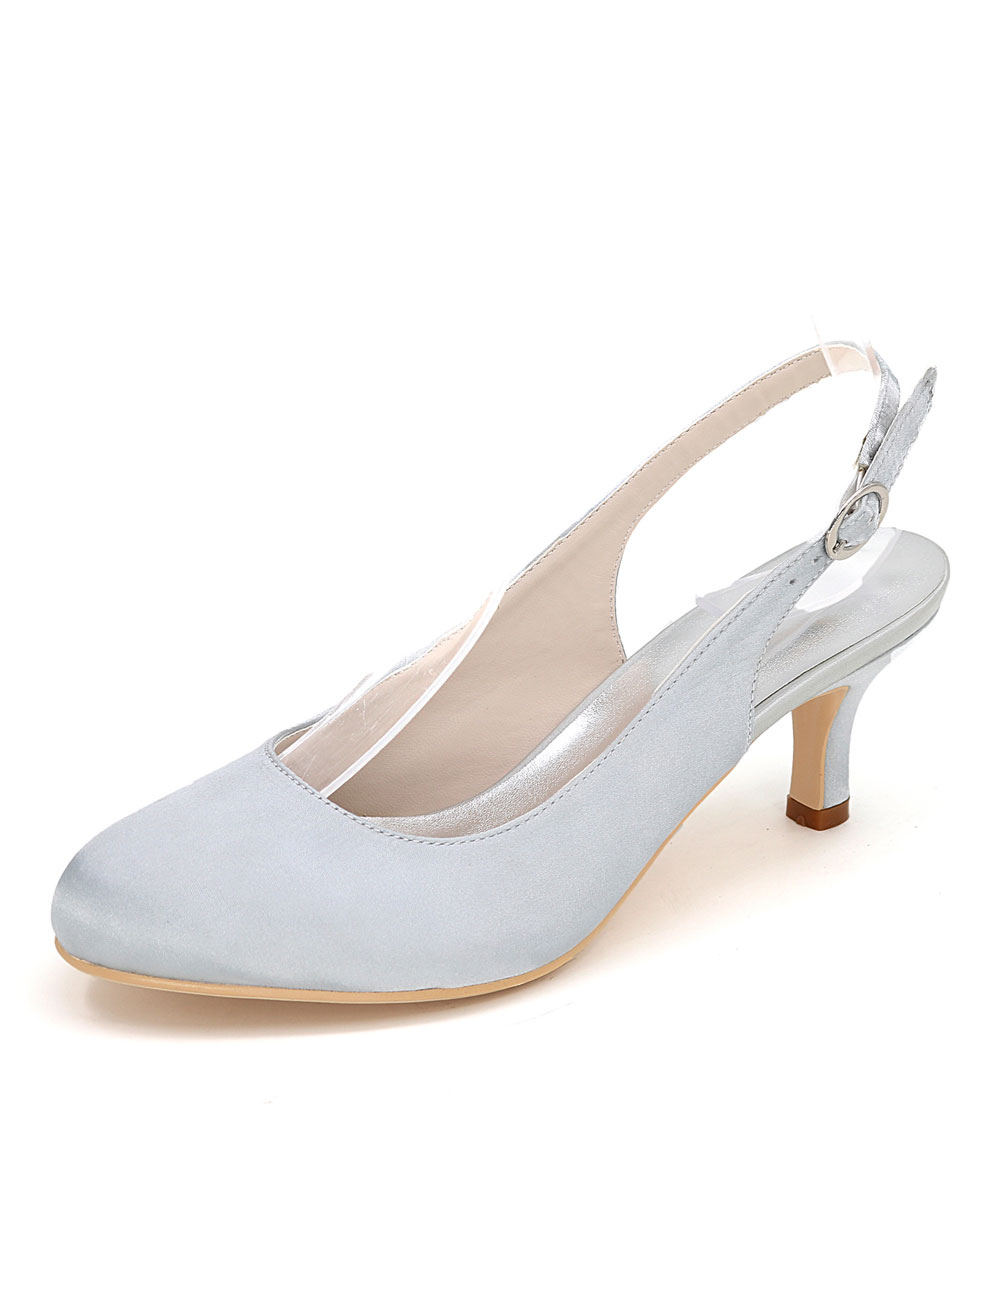 silver shoes for wedding guest